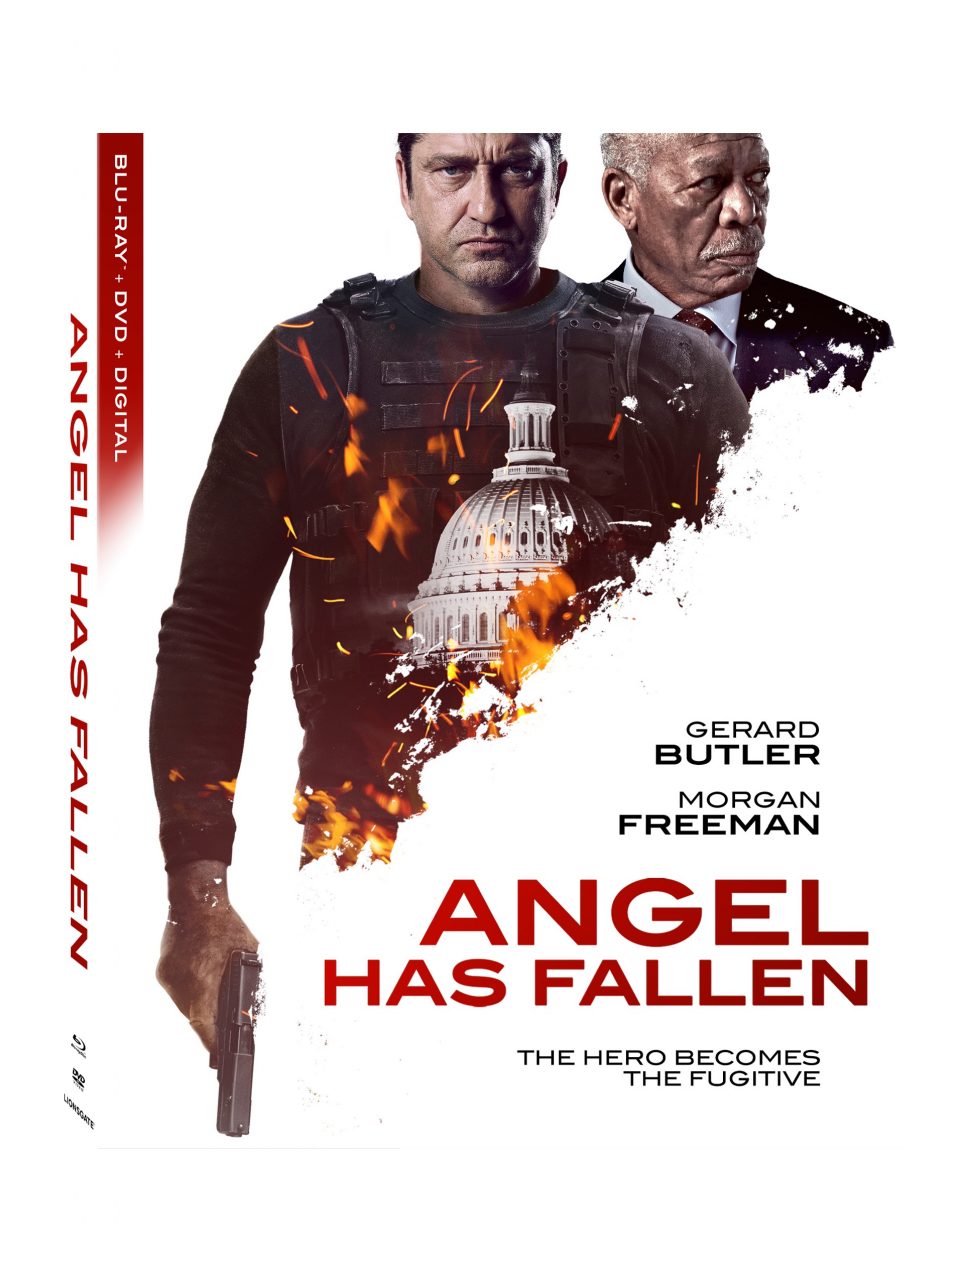 Angel Has Fallen Blu-Ray Combo Pack cover (Lionsgate Home Entertainment)